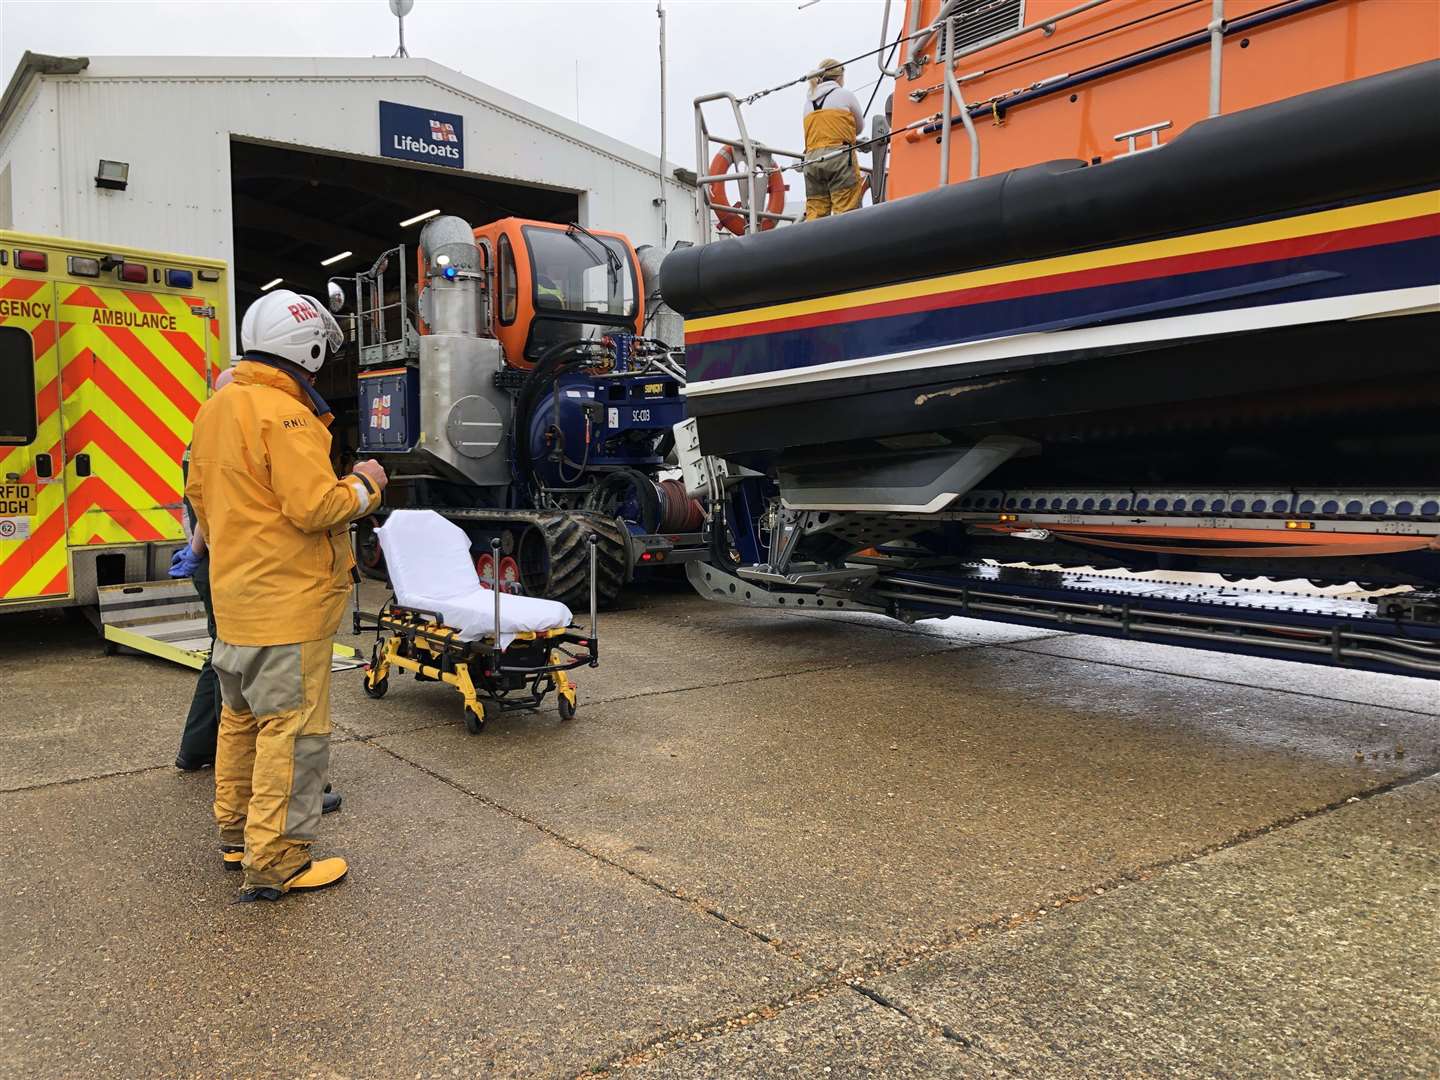 Ambulance in attendance at Dungeness RNLI lifeboat station waiting for patient on lifeboat. Credit: RNLI Judith Richardson (6283960)